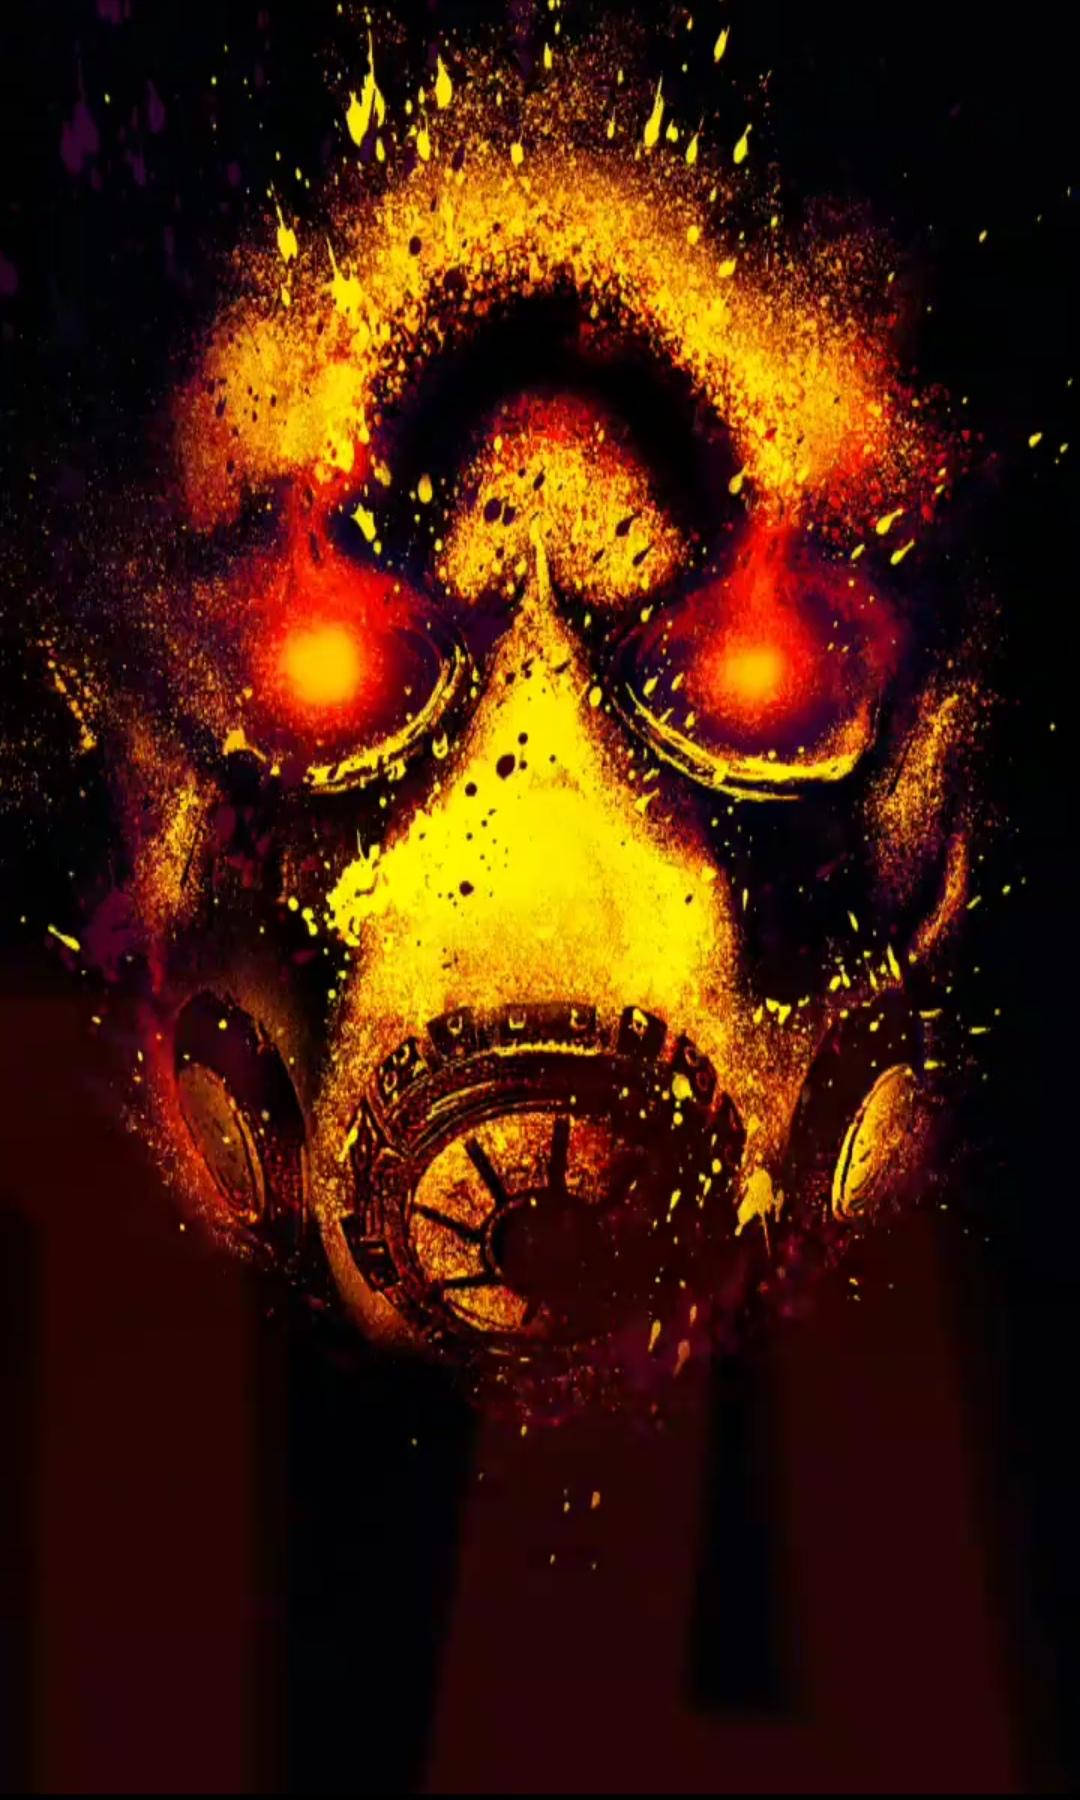 Get crazy with Borderlands 3 and the Psycho Bandit Wallpaper